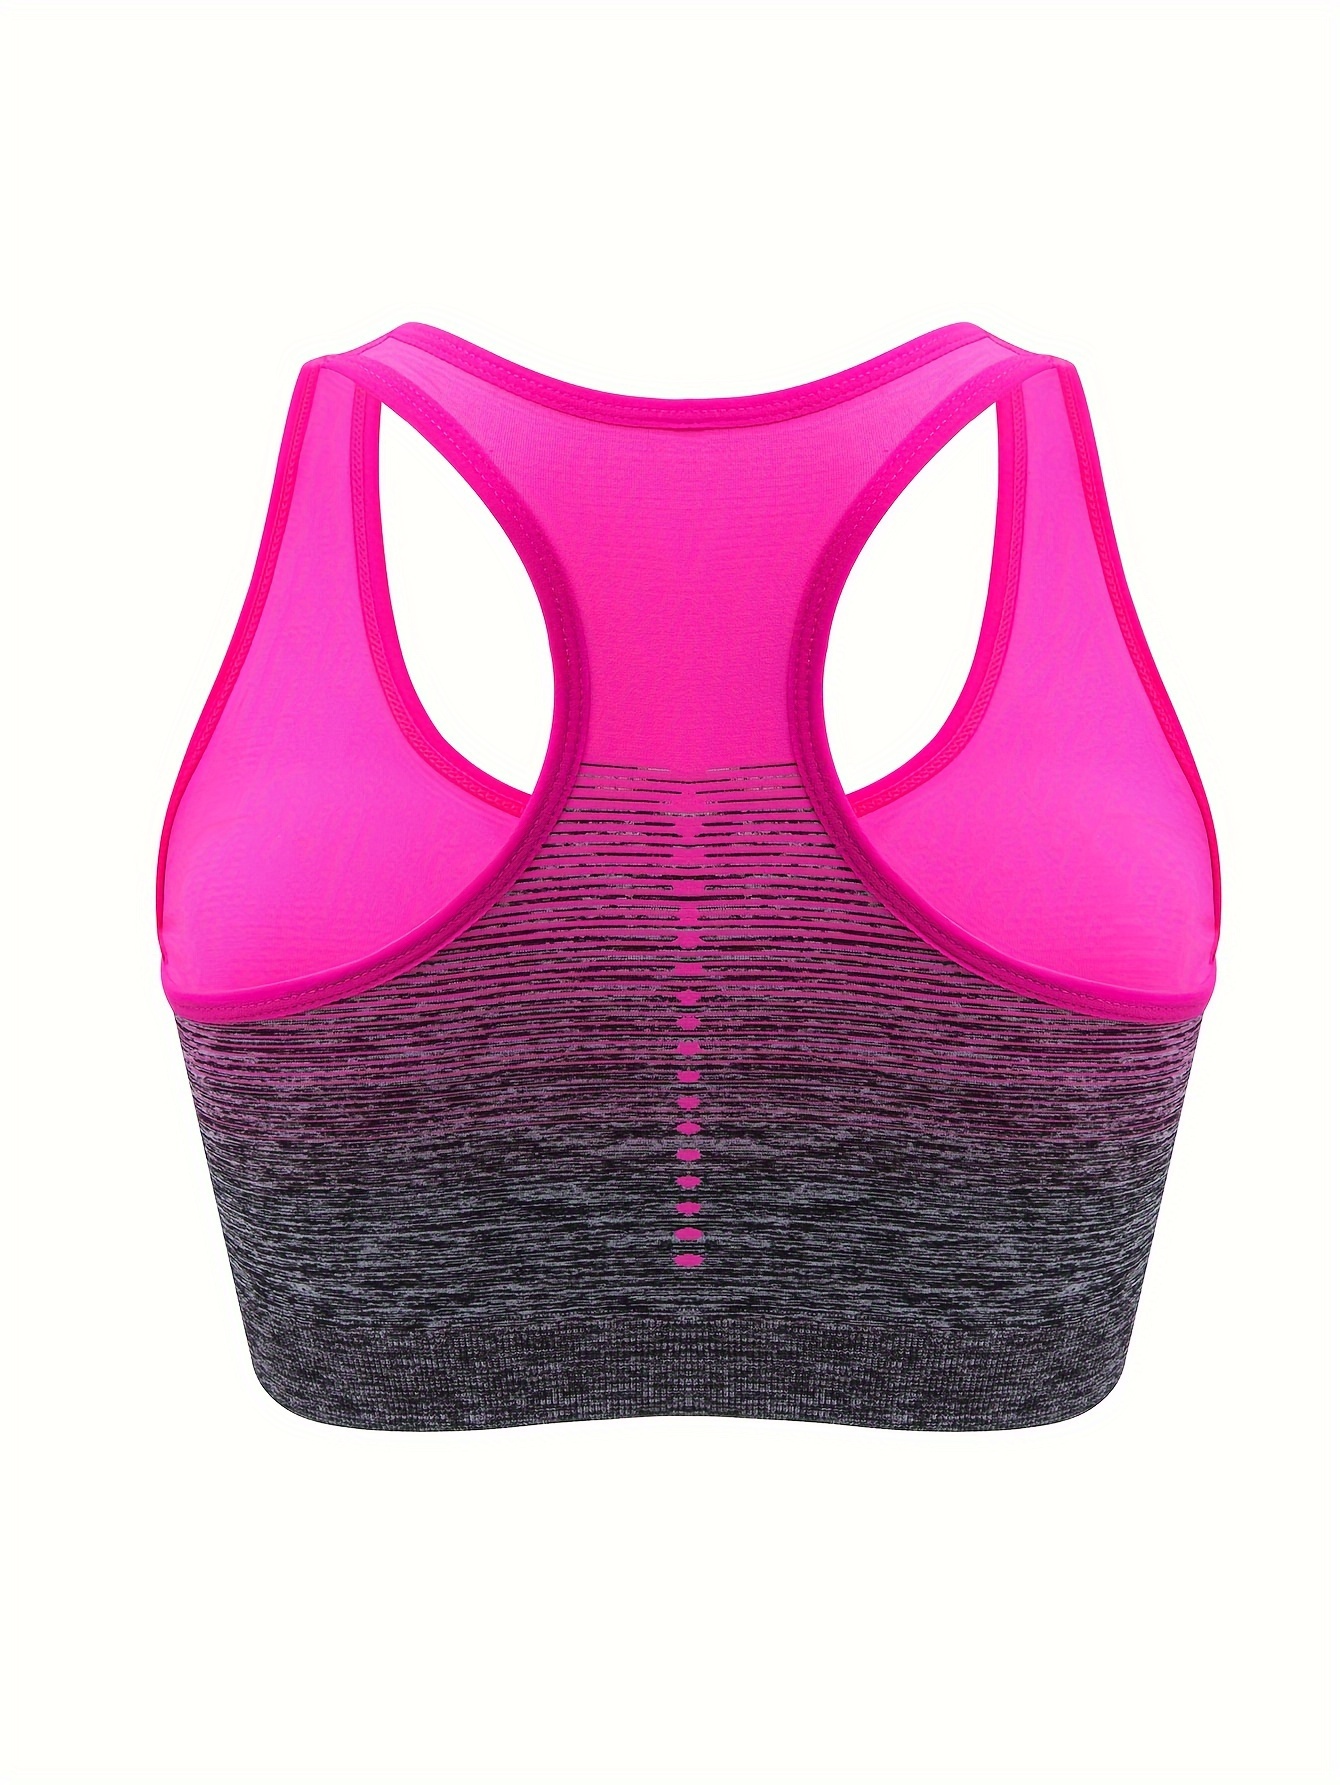 PINK Ultimate Racerback Push-Up Bra ($40) ❤ liked on Polyvore featuring  activewear, sports bras, pink sports bra, racerback sports bra, logo  sportswear, red spo…